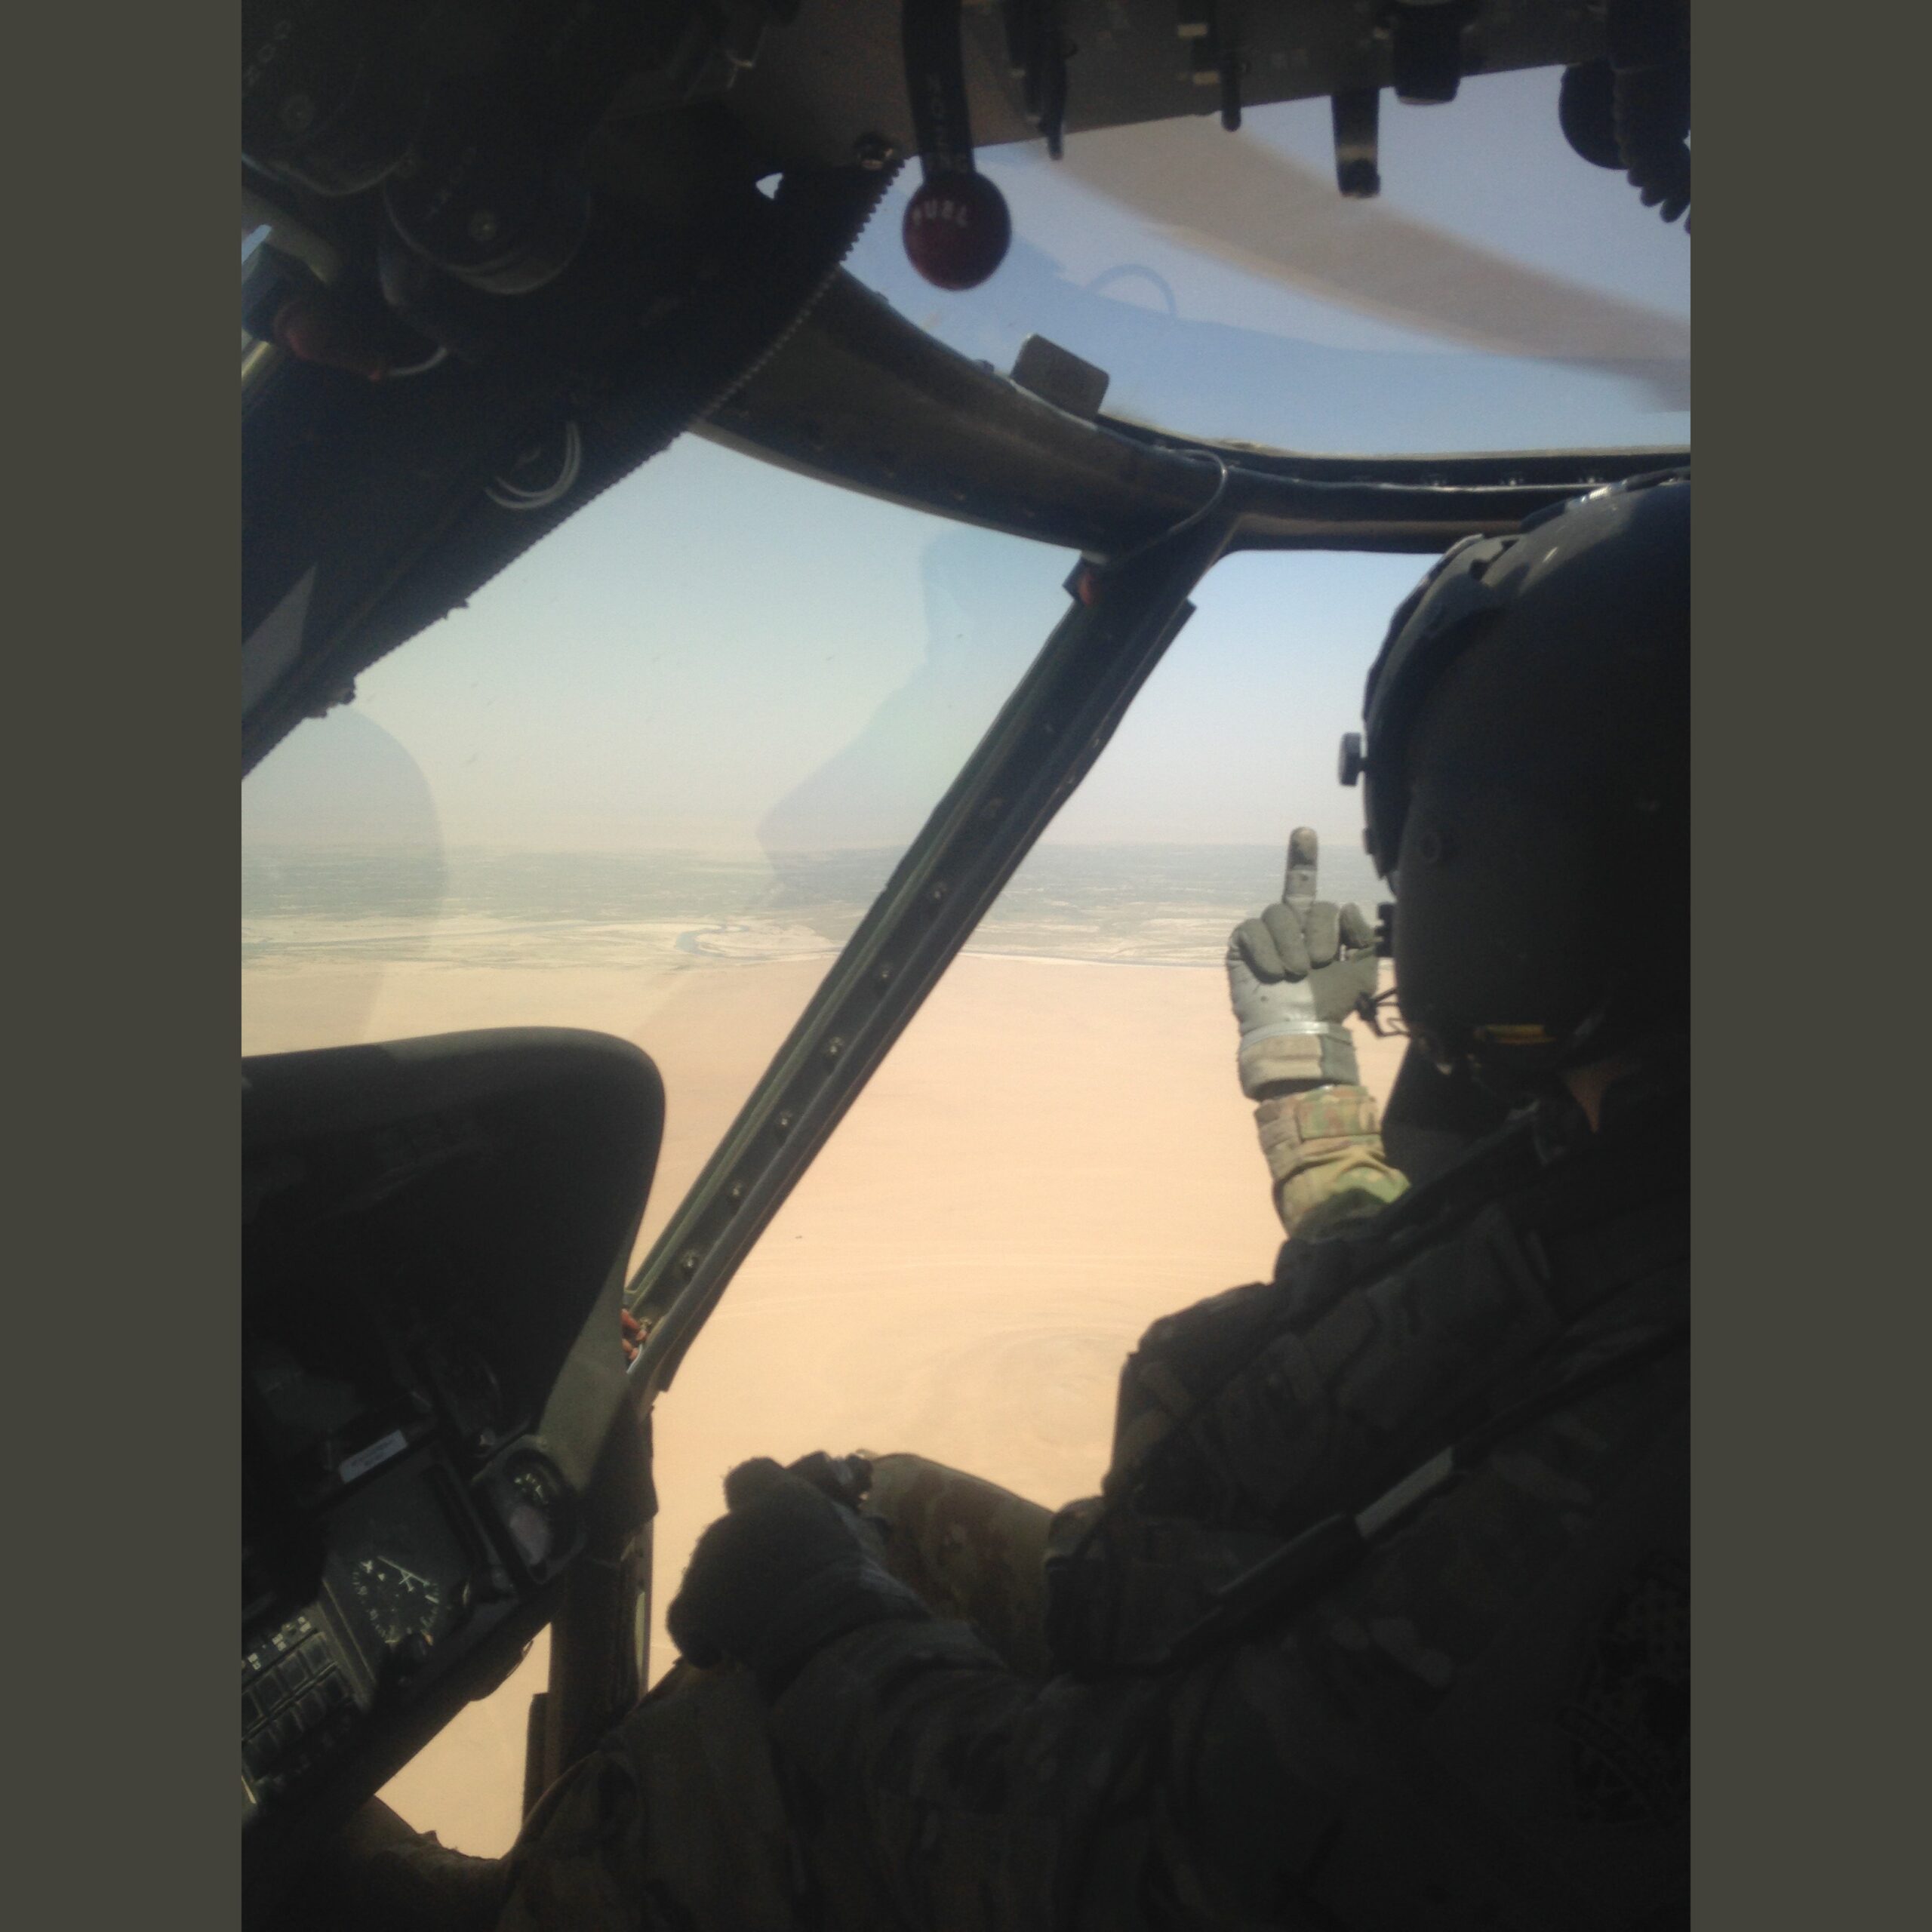 Hey, Helmand! Army helicopter pilot "CandyMan" extending his middle-finger-salute out the window of his Blackhawk at Helmund Province, Afghanistan